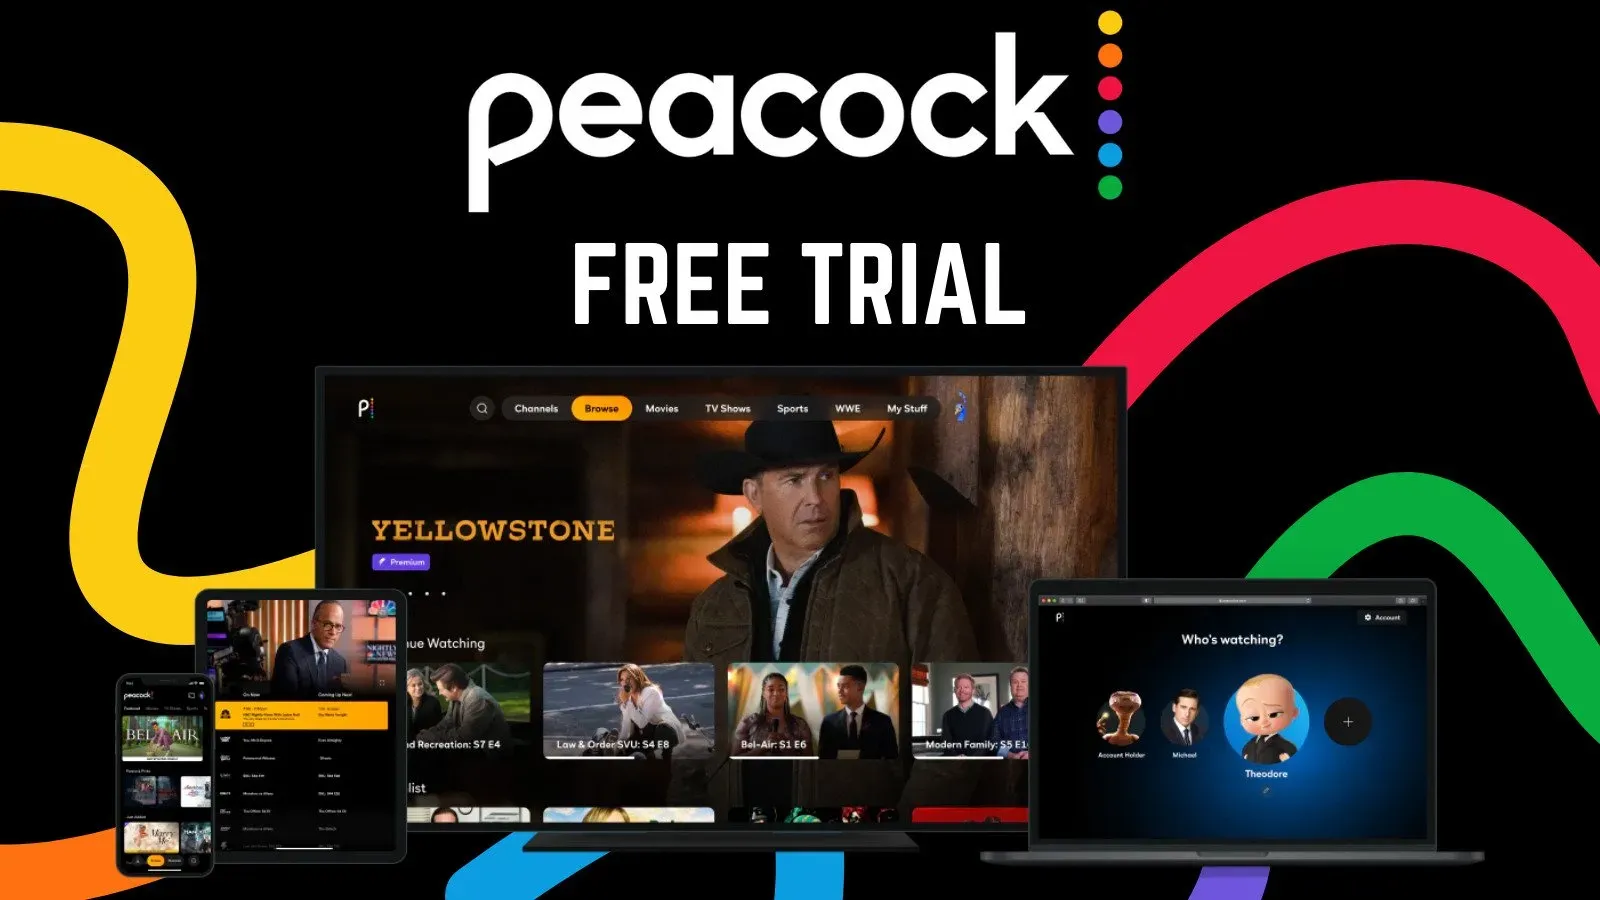 What is the Peacock Free Trial?